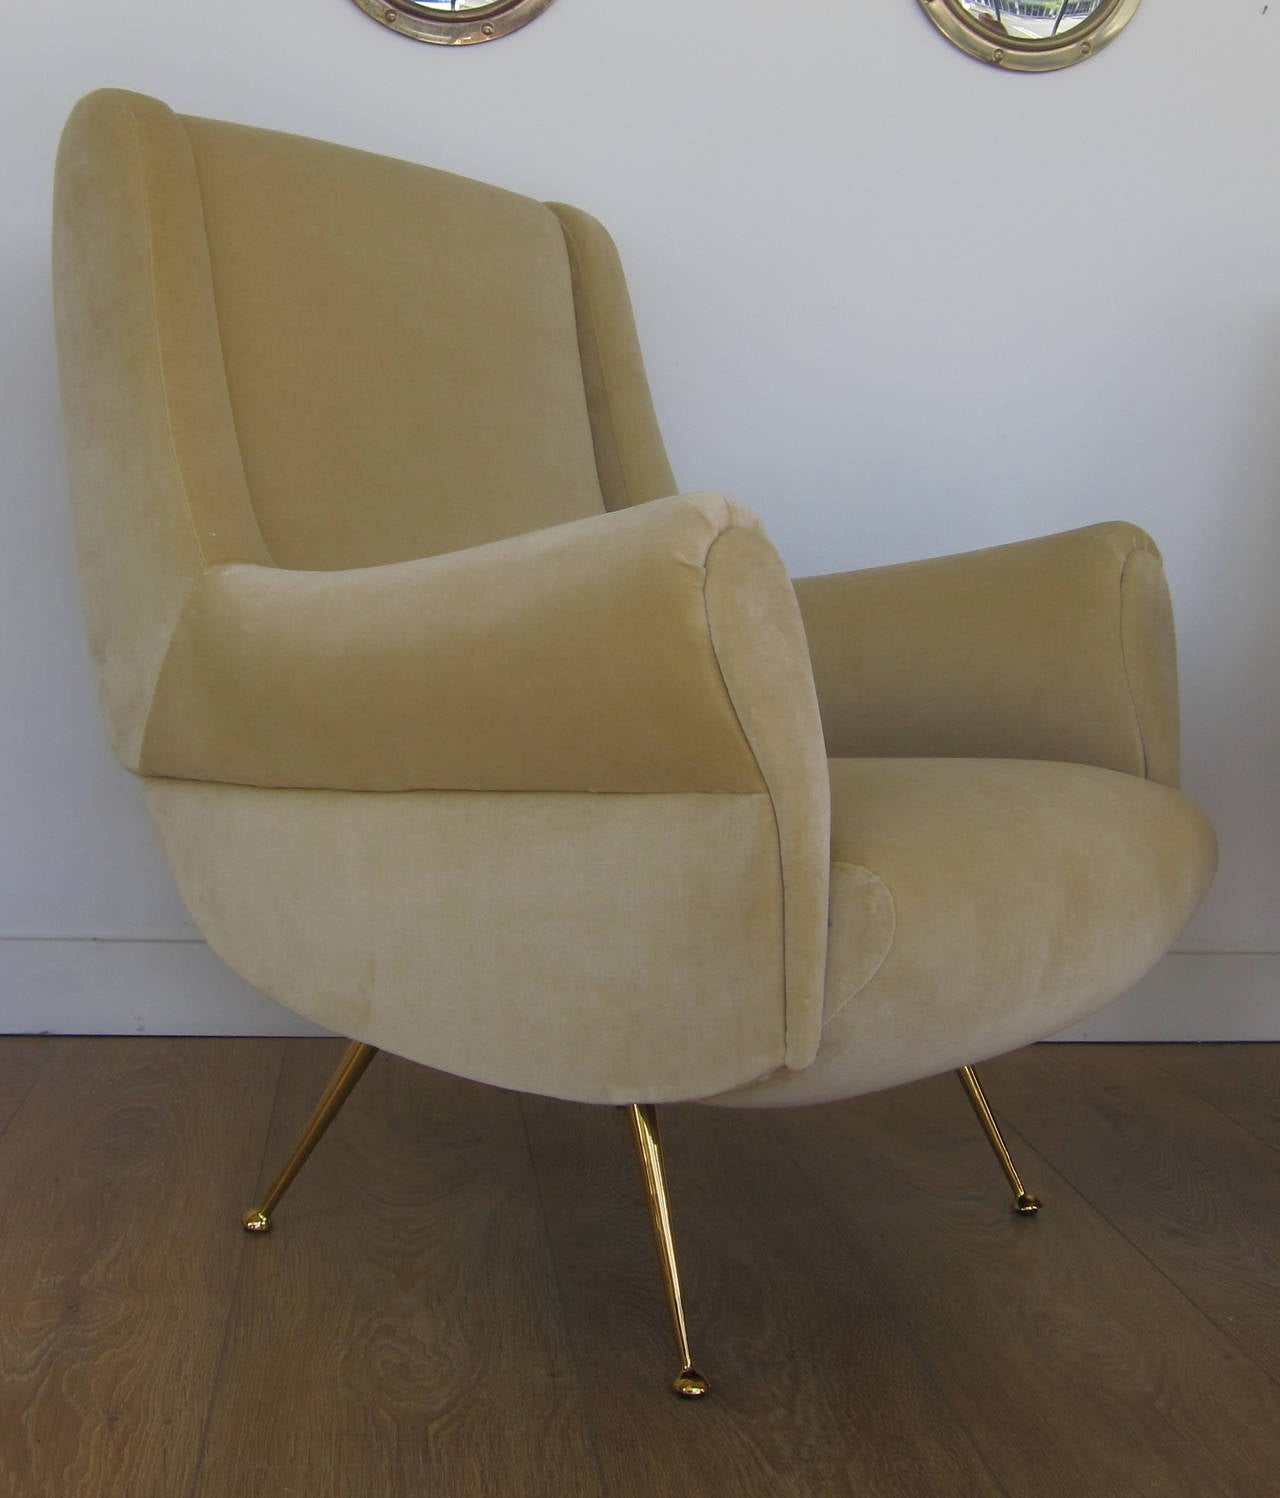 Superb pair of Italian lounge chairs, circa 1950. Newly upholstered with velvet, brass plated legs. All restored to perfection. Complimentary shipping to Continental US only.